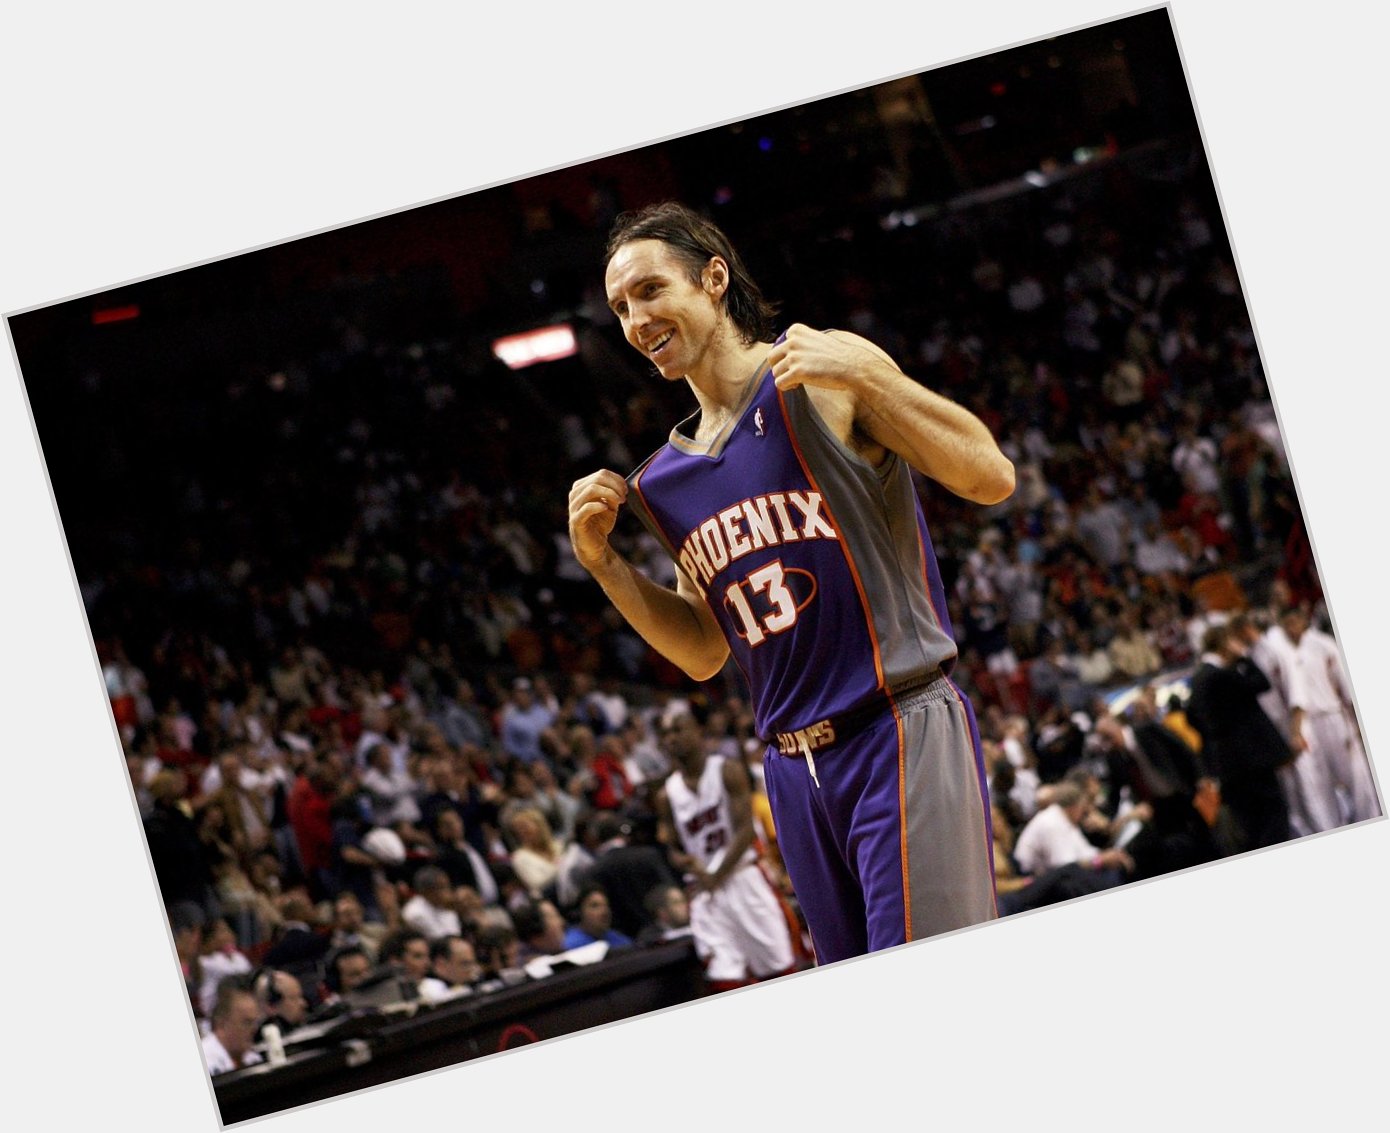 Happy 44th birthday to one of the best point guards in NBA history, Steve Nash 